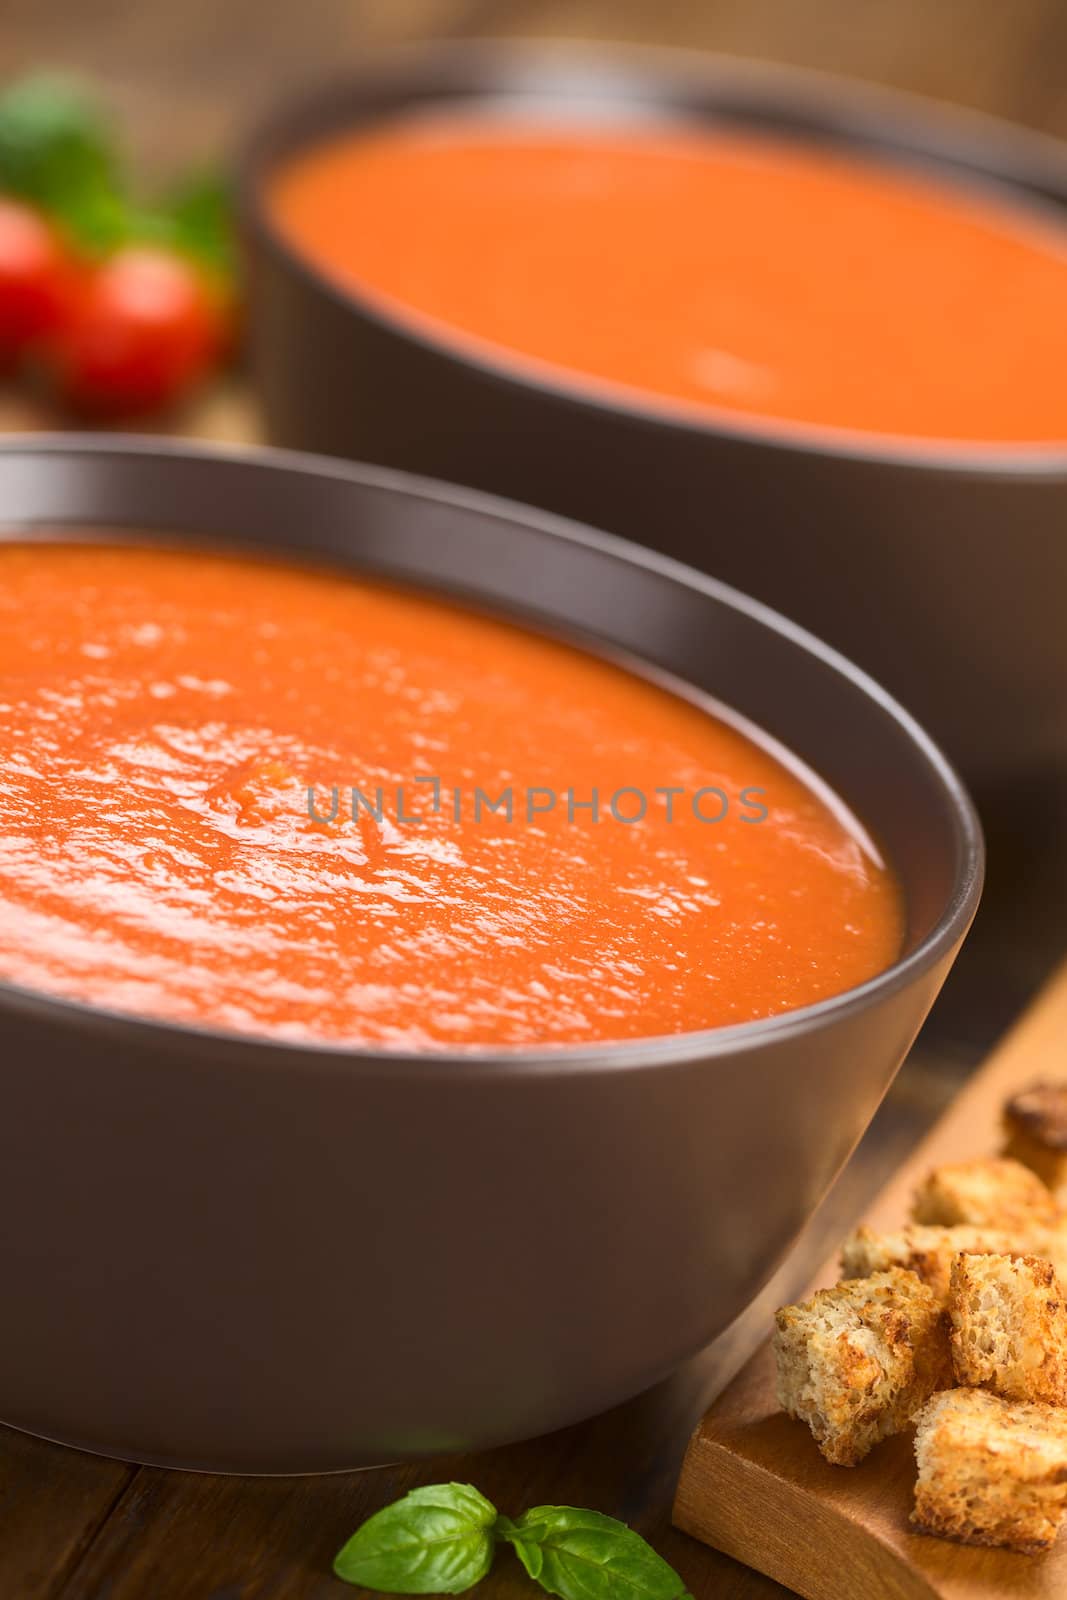 Fresh homemade tomato soup in brown bowls on dark wood with wholegrain croutons on the side (Selective Focus, Focus one third into the soup) 